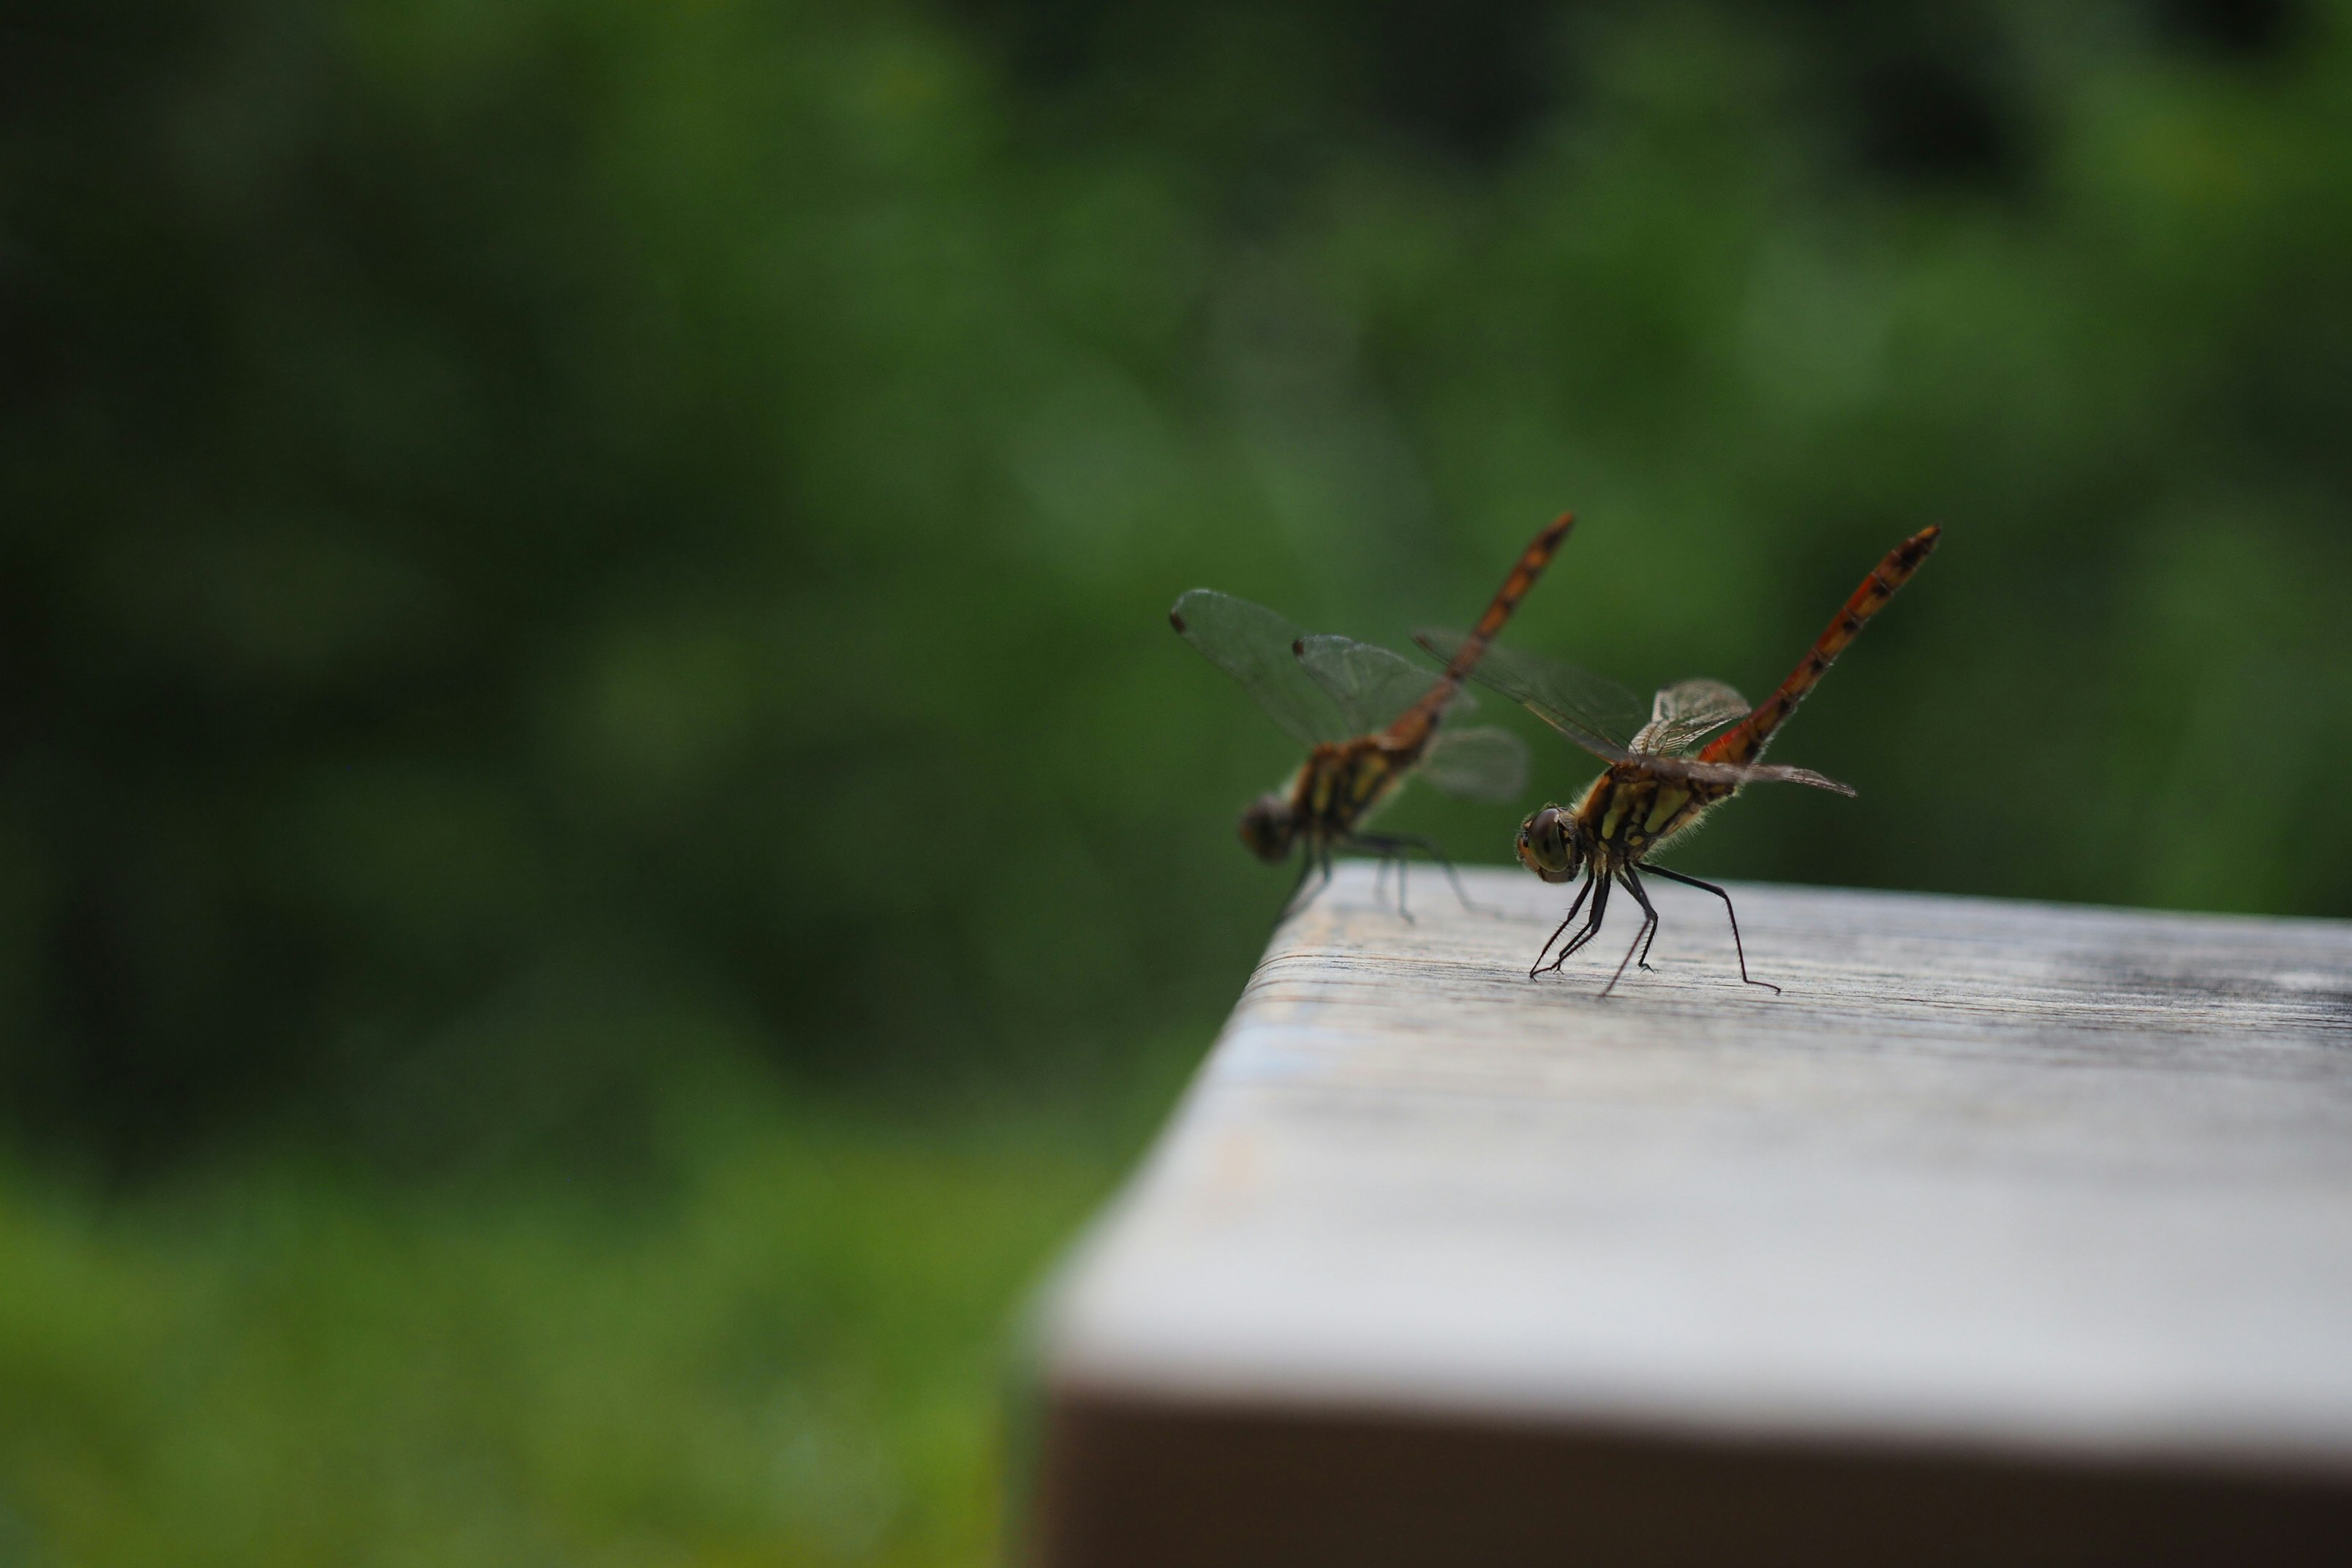 brown dragonfly perched on brown wooden surface during daytime